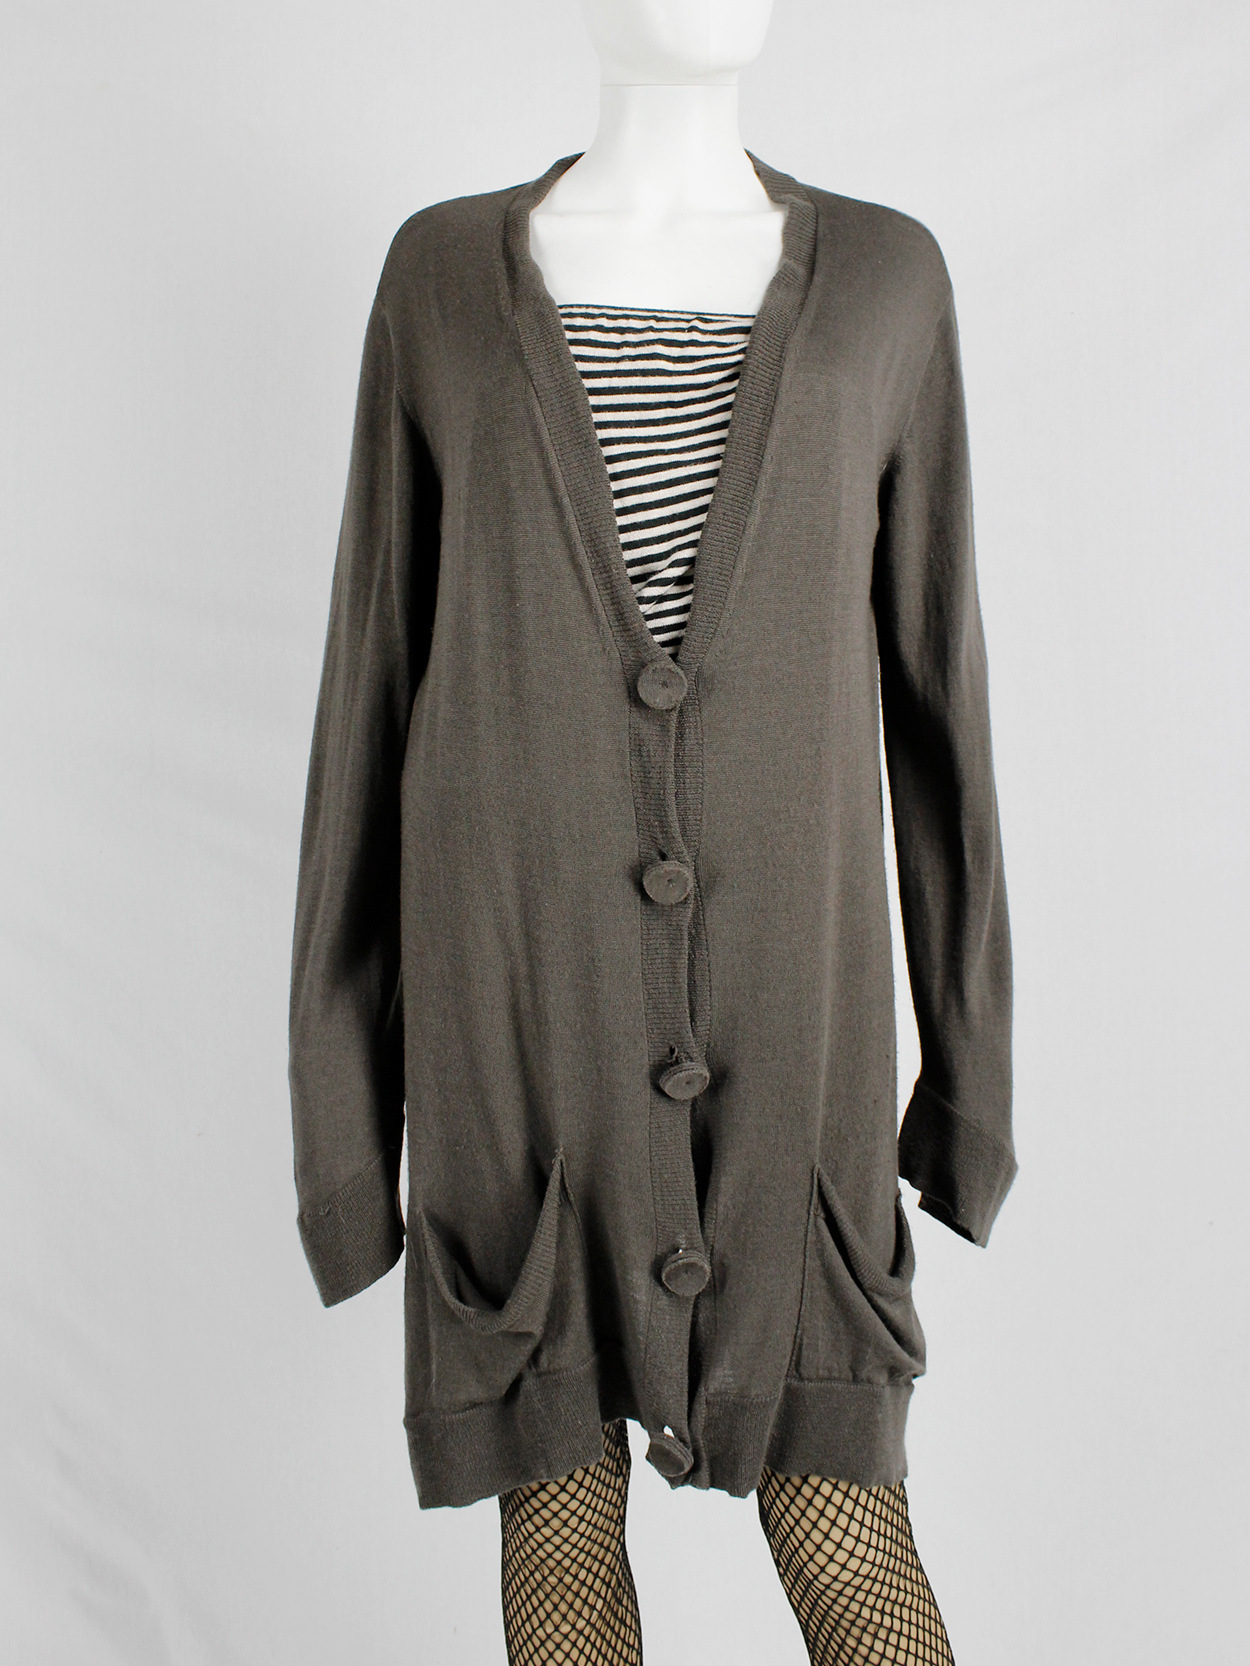 Maison Martin Margiela brown oversized cardigan with fabric covered buttons fall 2004 (11)